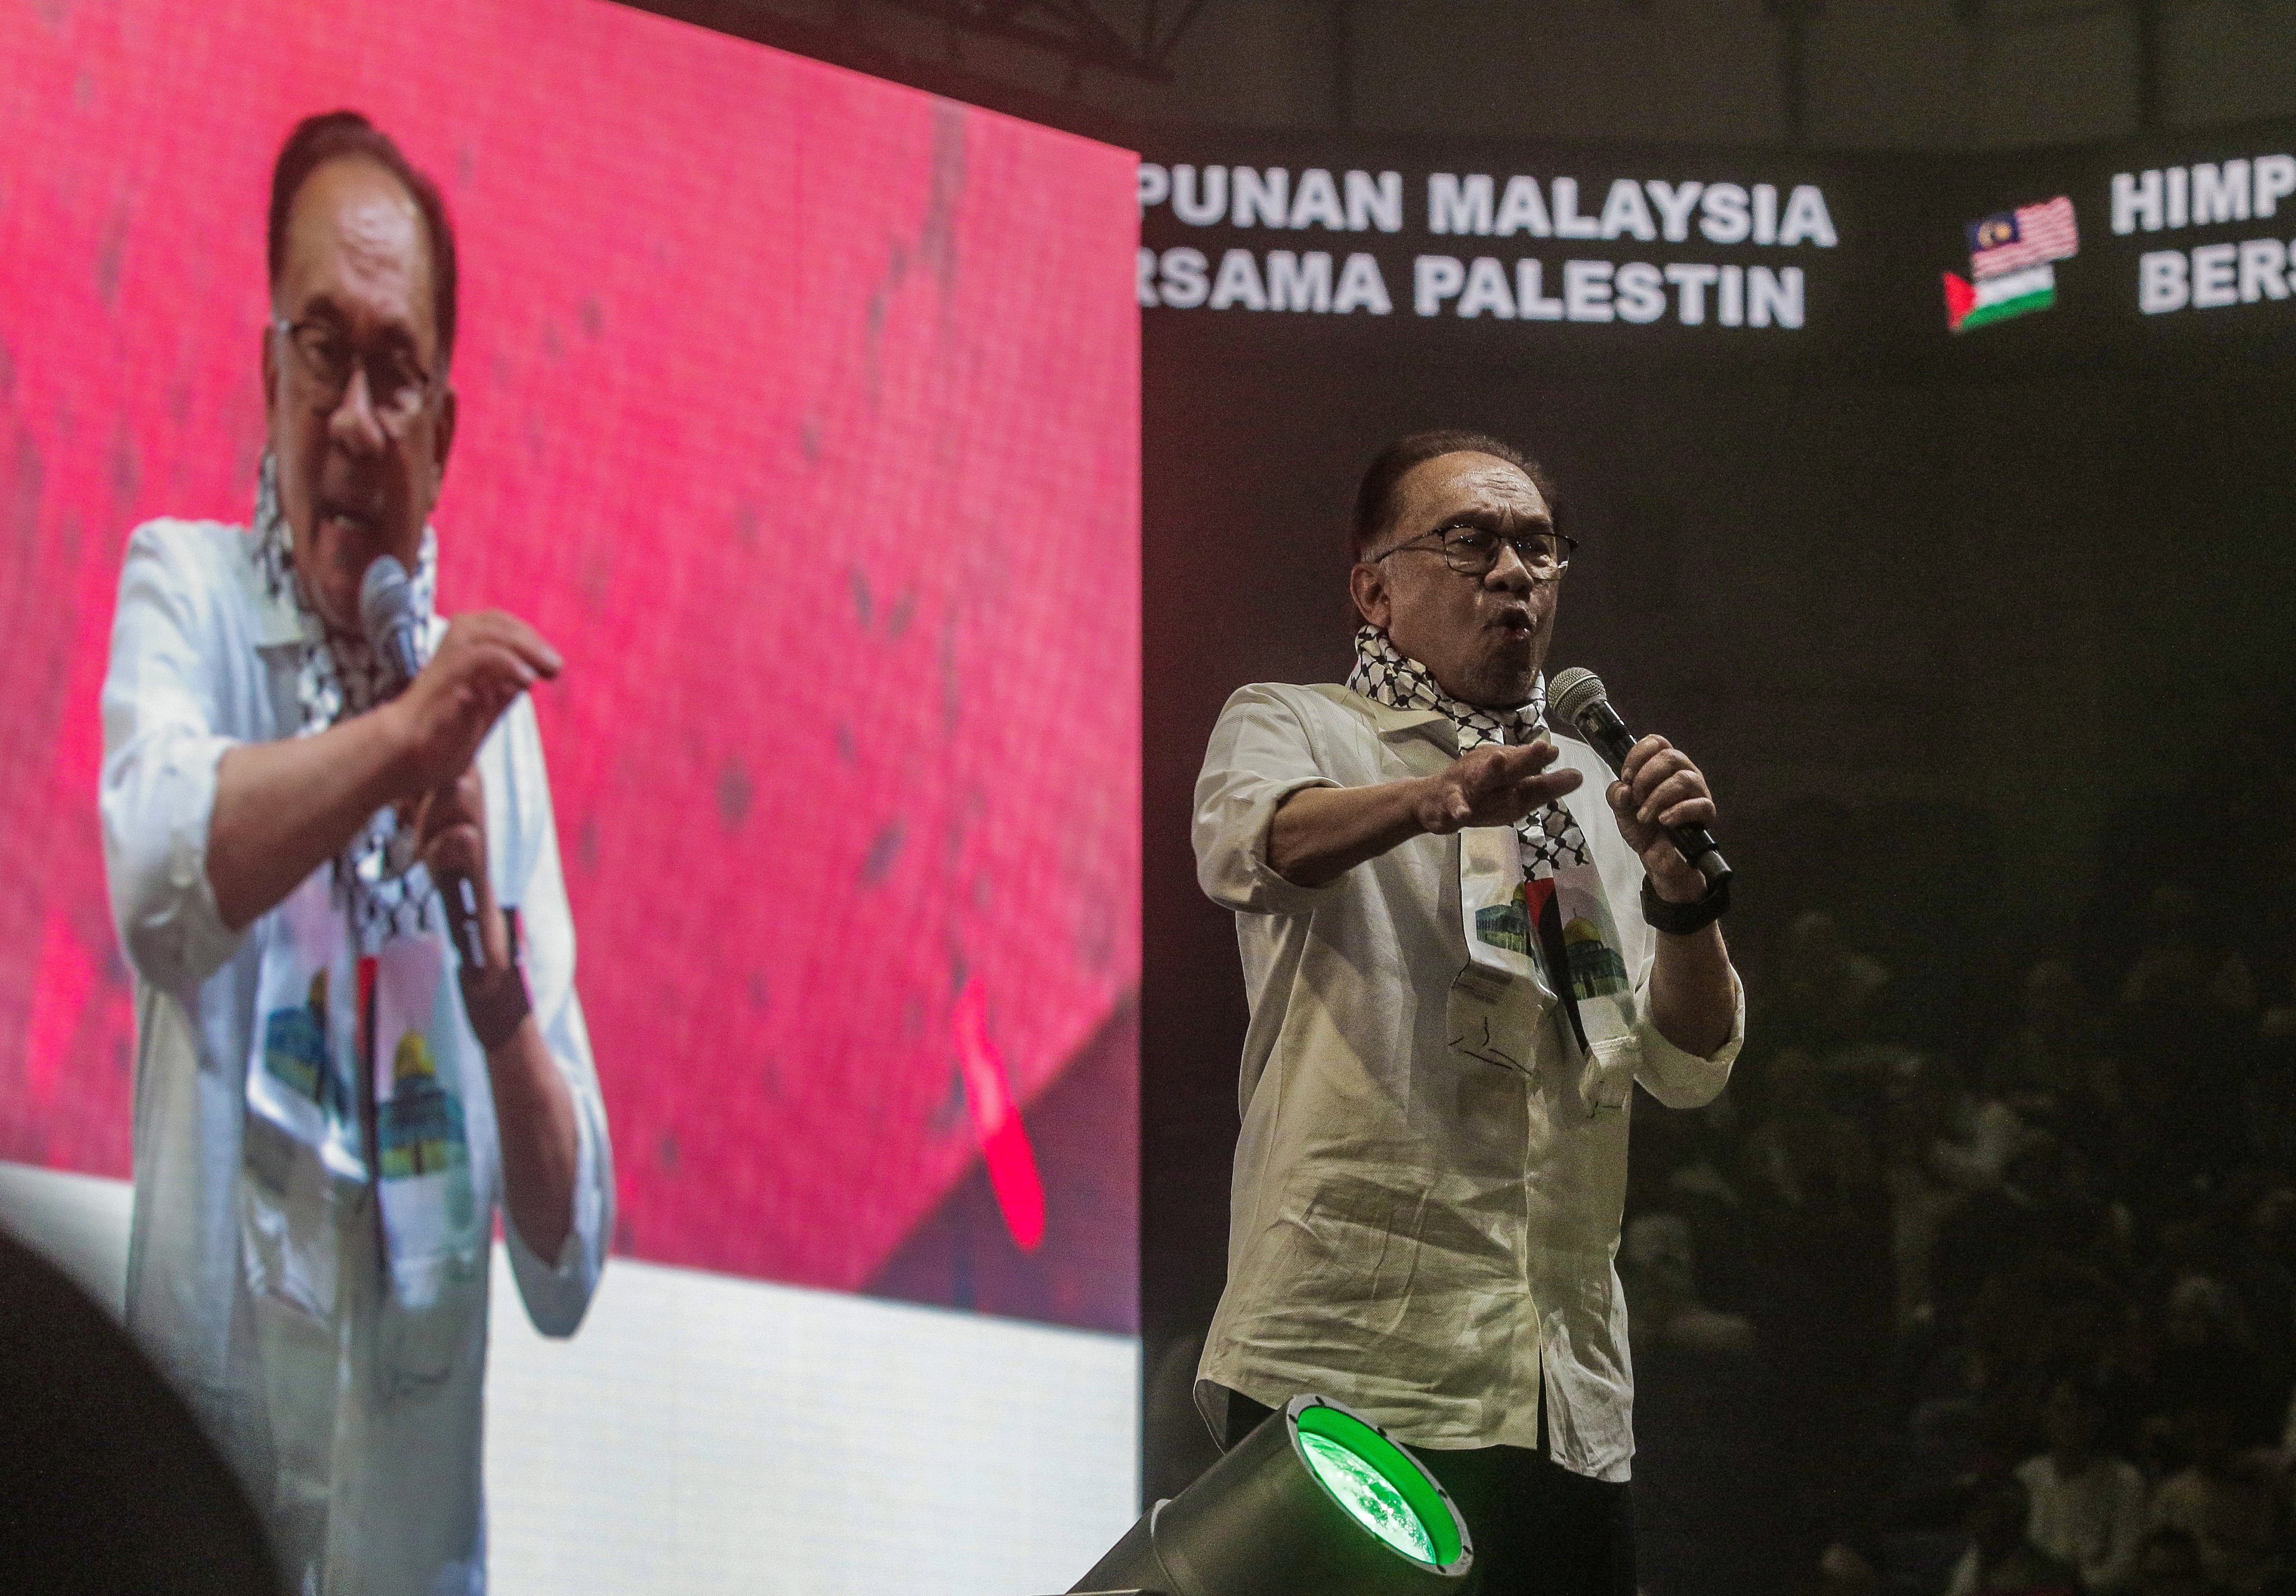 Malaysia’s Prime Minister Anwar Ibrahim speaks at the ‘Malaysia Stands with Palestine’ rally in Kuala Lumpur on October 24. Photo: EPA-EFE